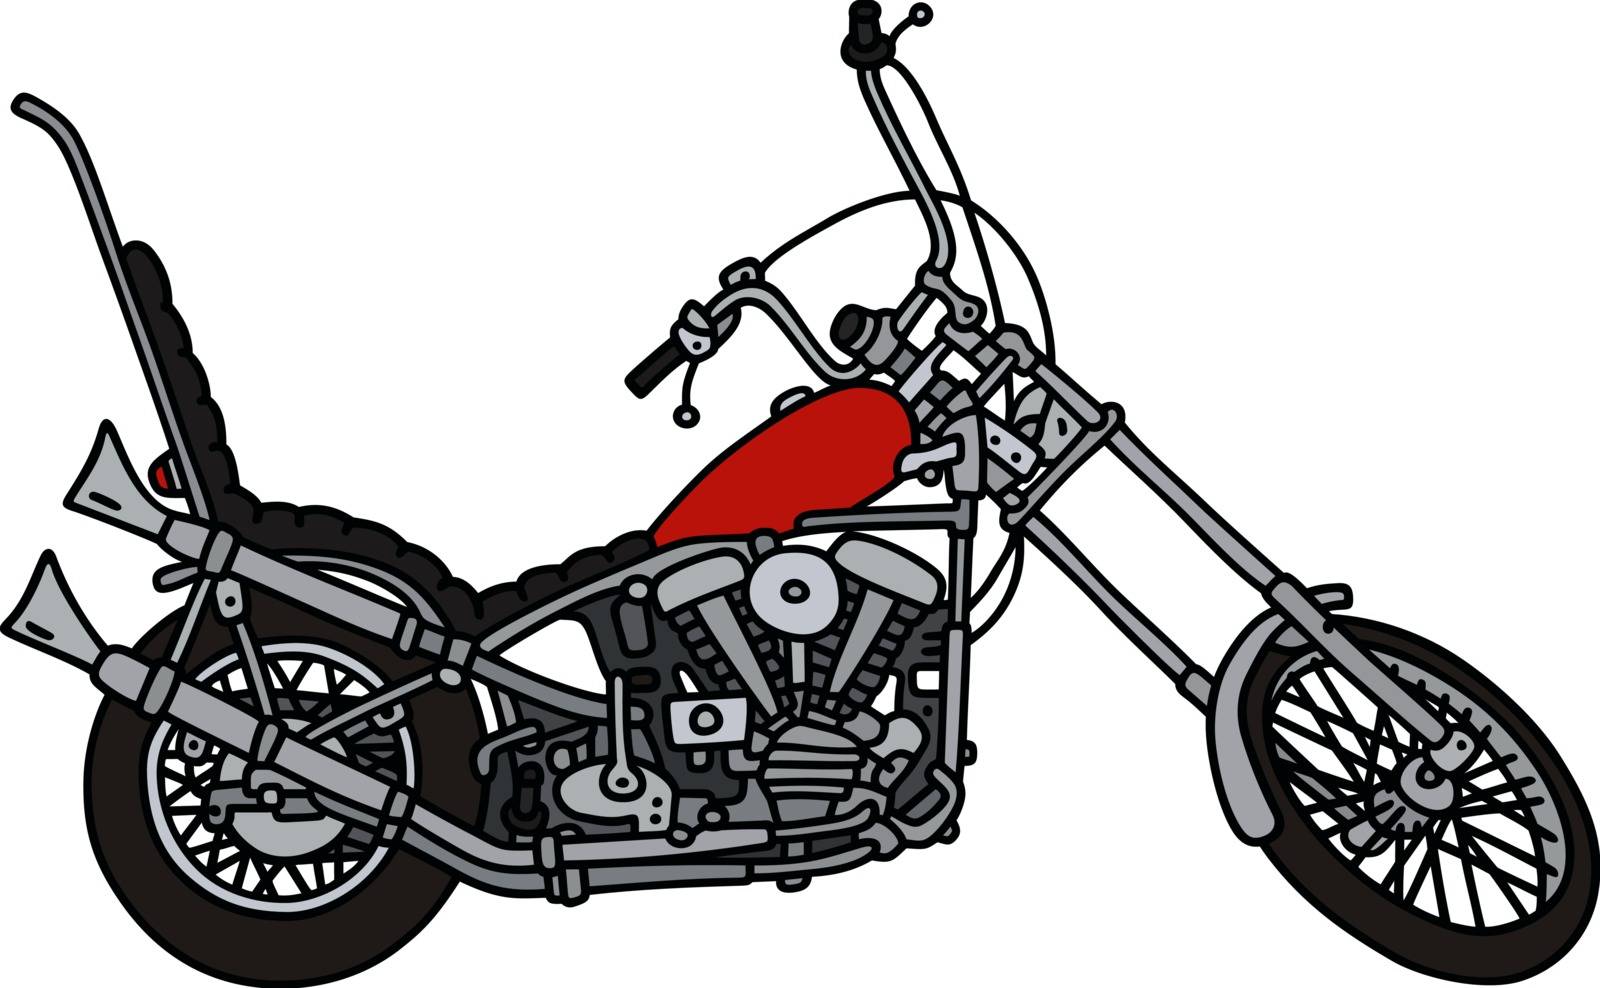 Hand drawing of a classic red chopper